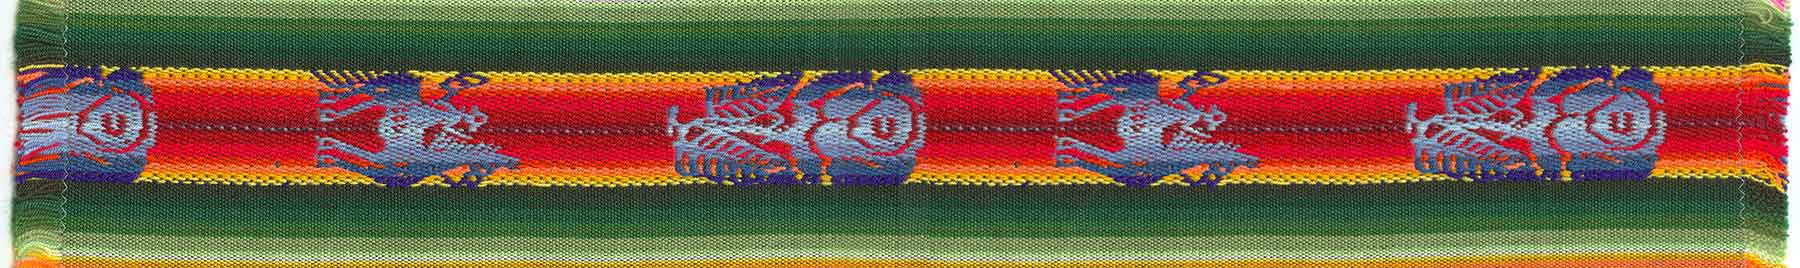 Hand Woven Fabric from Bolivia